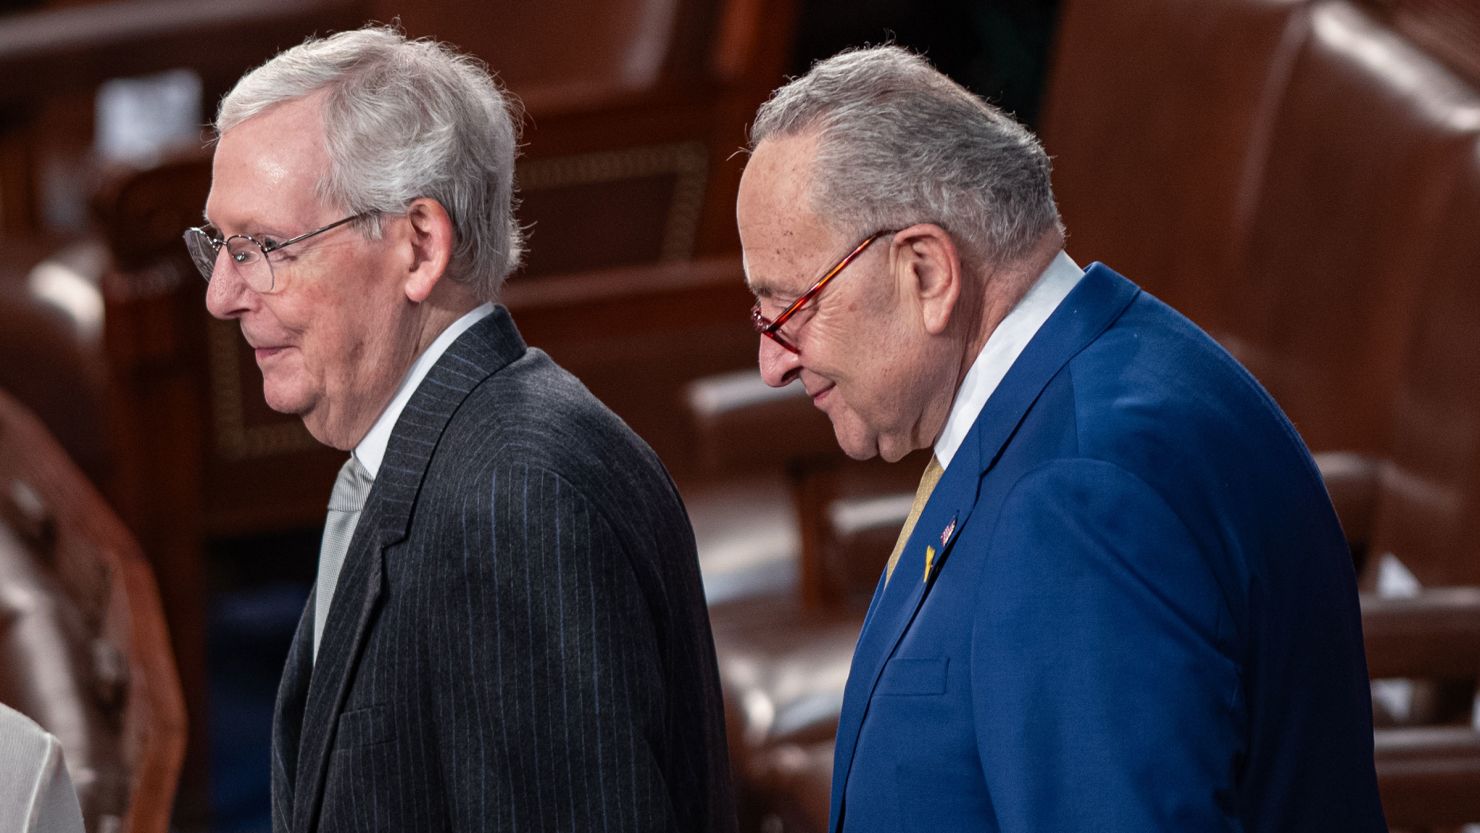 Senate Minority Leader Mitch McConnell and Senate Majority Leader Chuck Schumer enter the chamber at a joint session of the US Congress before United States President Joe Biden delivers his State of the Union address in Washington, DC on Thursday, March 7.